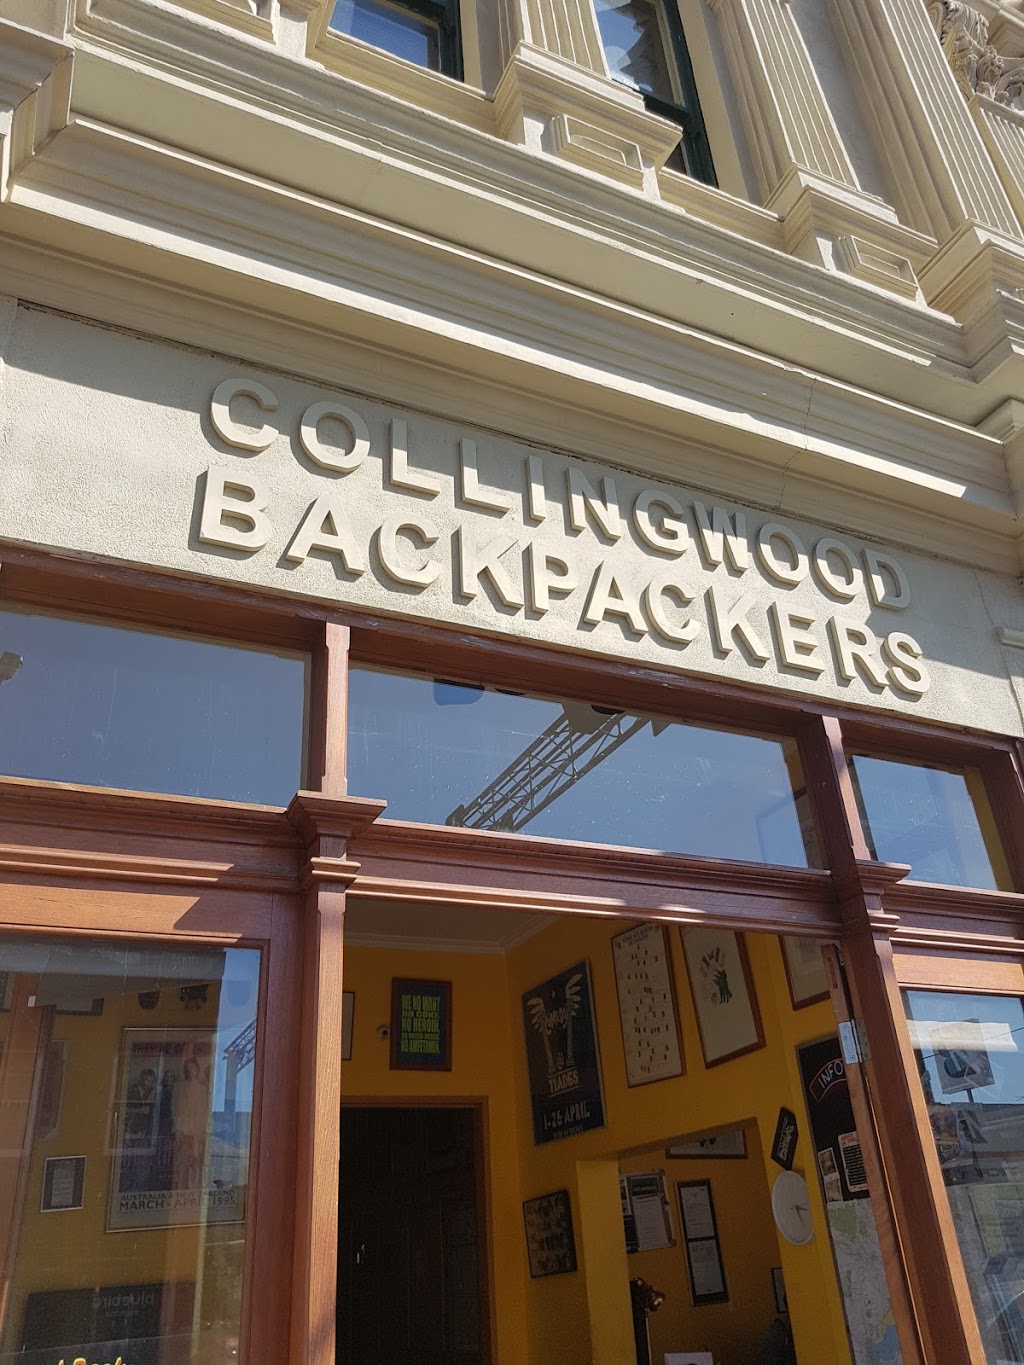 Collingwood Backpackers | lodging | 137-139 Johnston St, Collingwood VIC 3066, Australia | 0420804208 OR +61 420 804 208